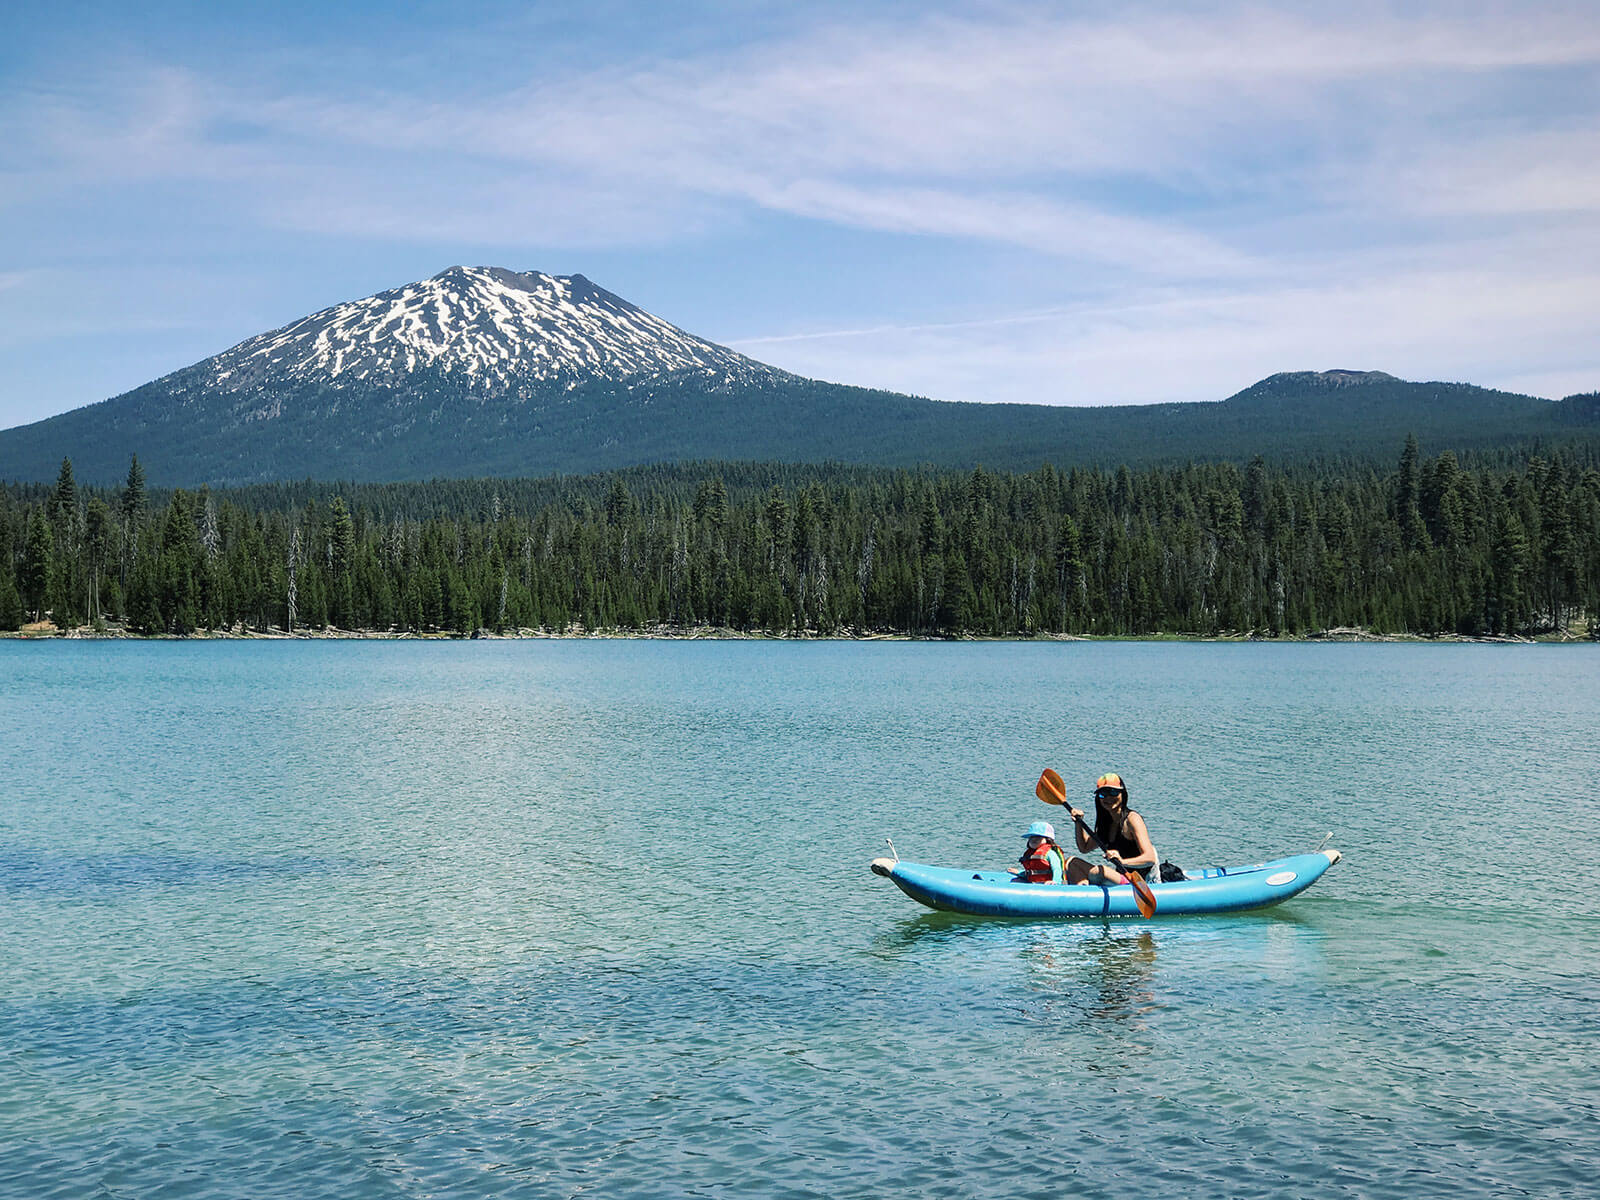 Kayaking at Lava Lake in Bend, Oregon with a view of Mount Bachelor in the background